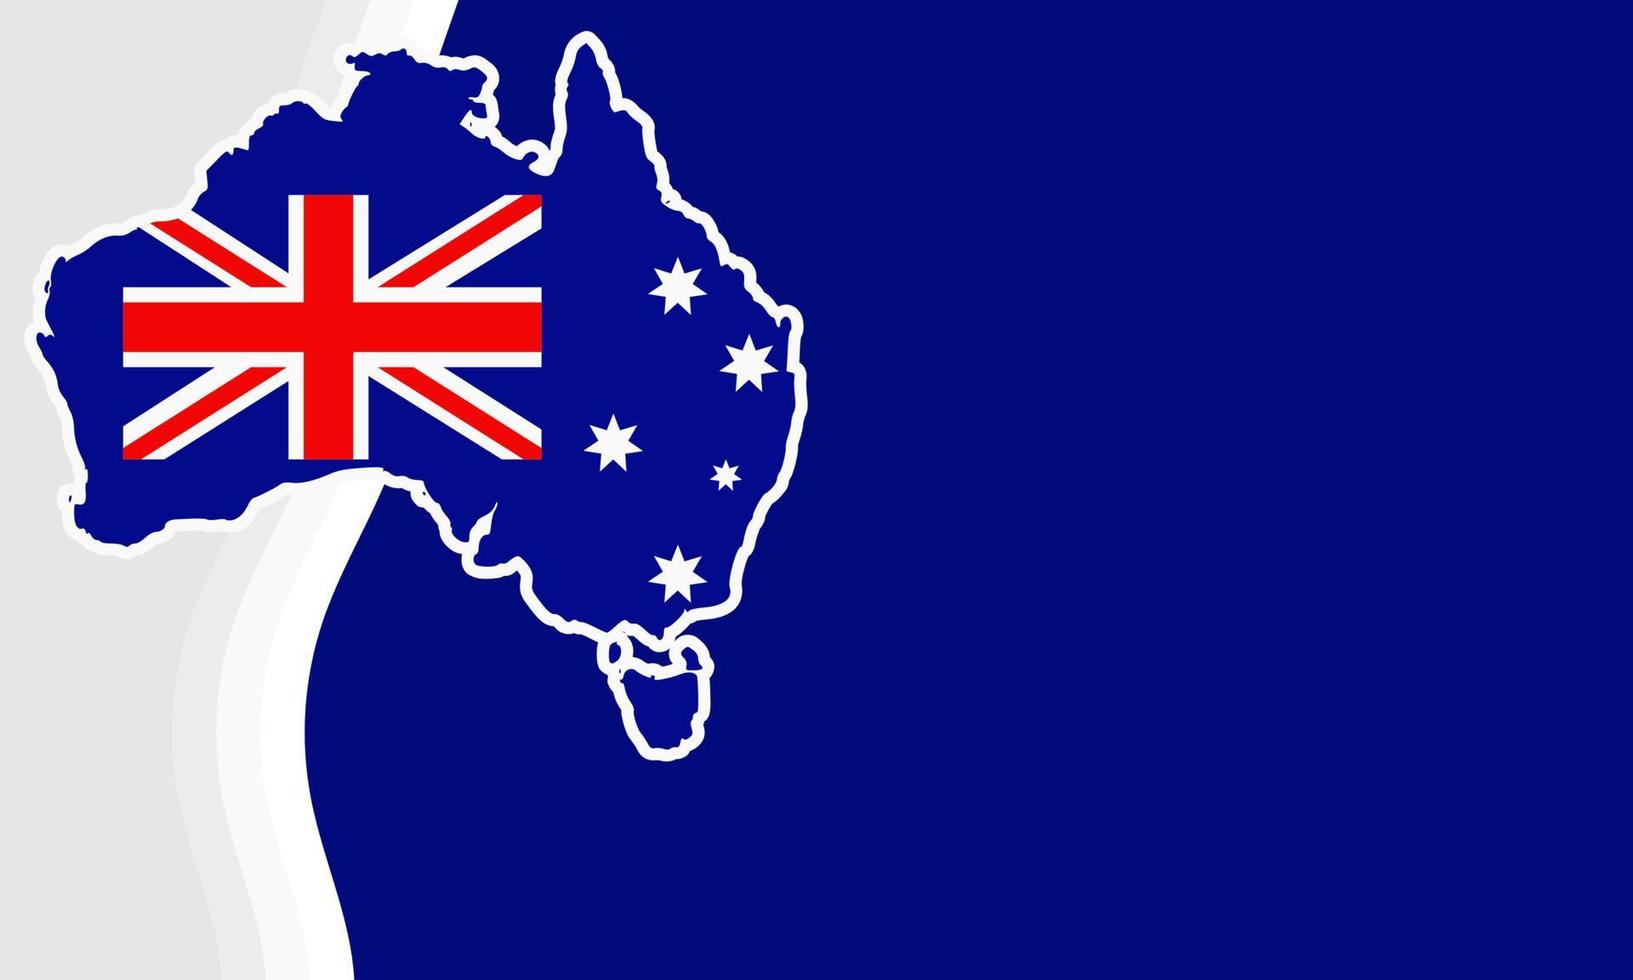 Background Australia Day vector illustration, and Copy Space Area. Suitable to be placed on content with that theme.